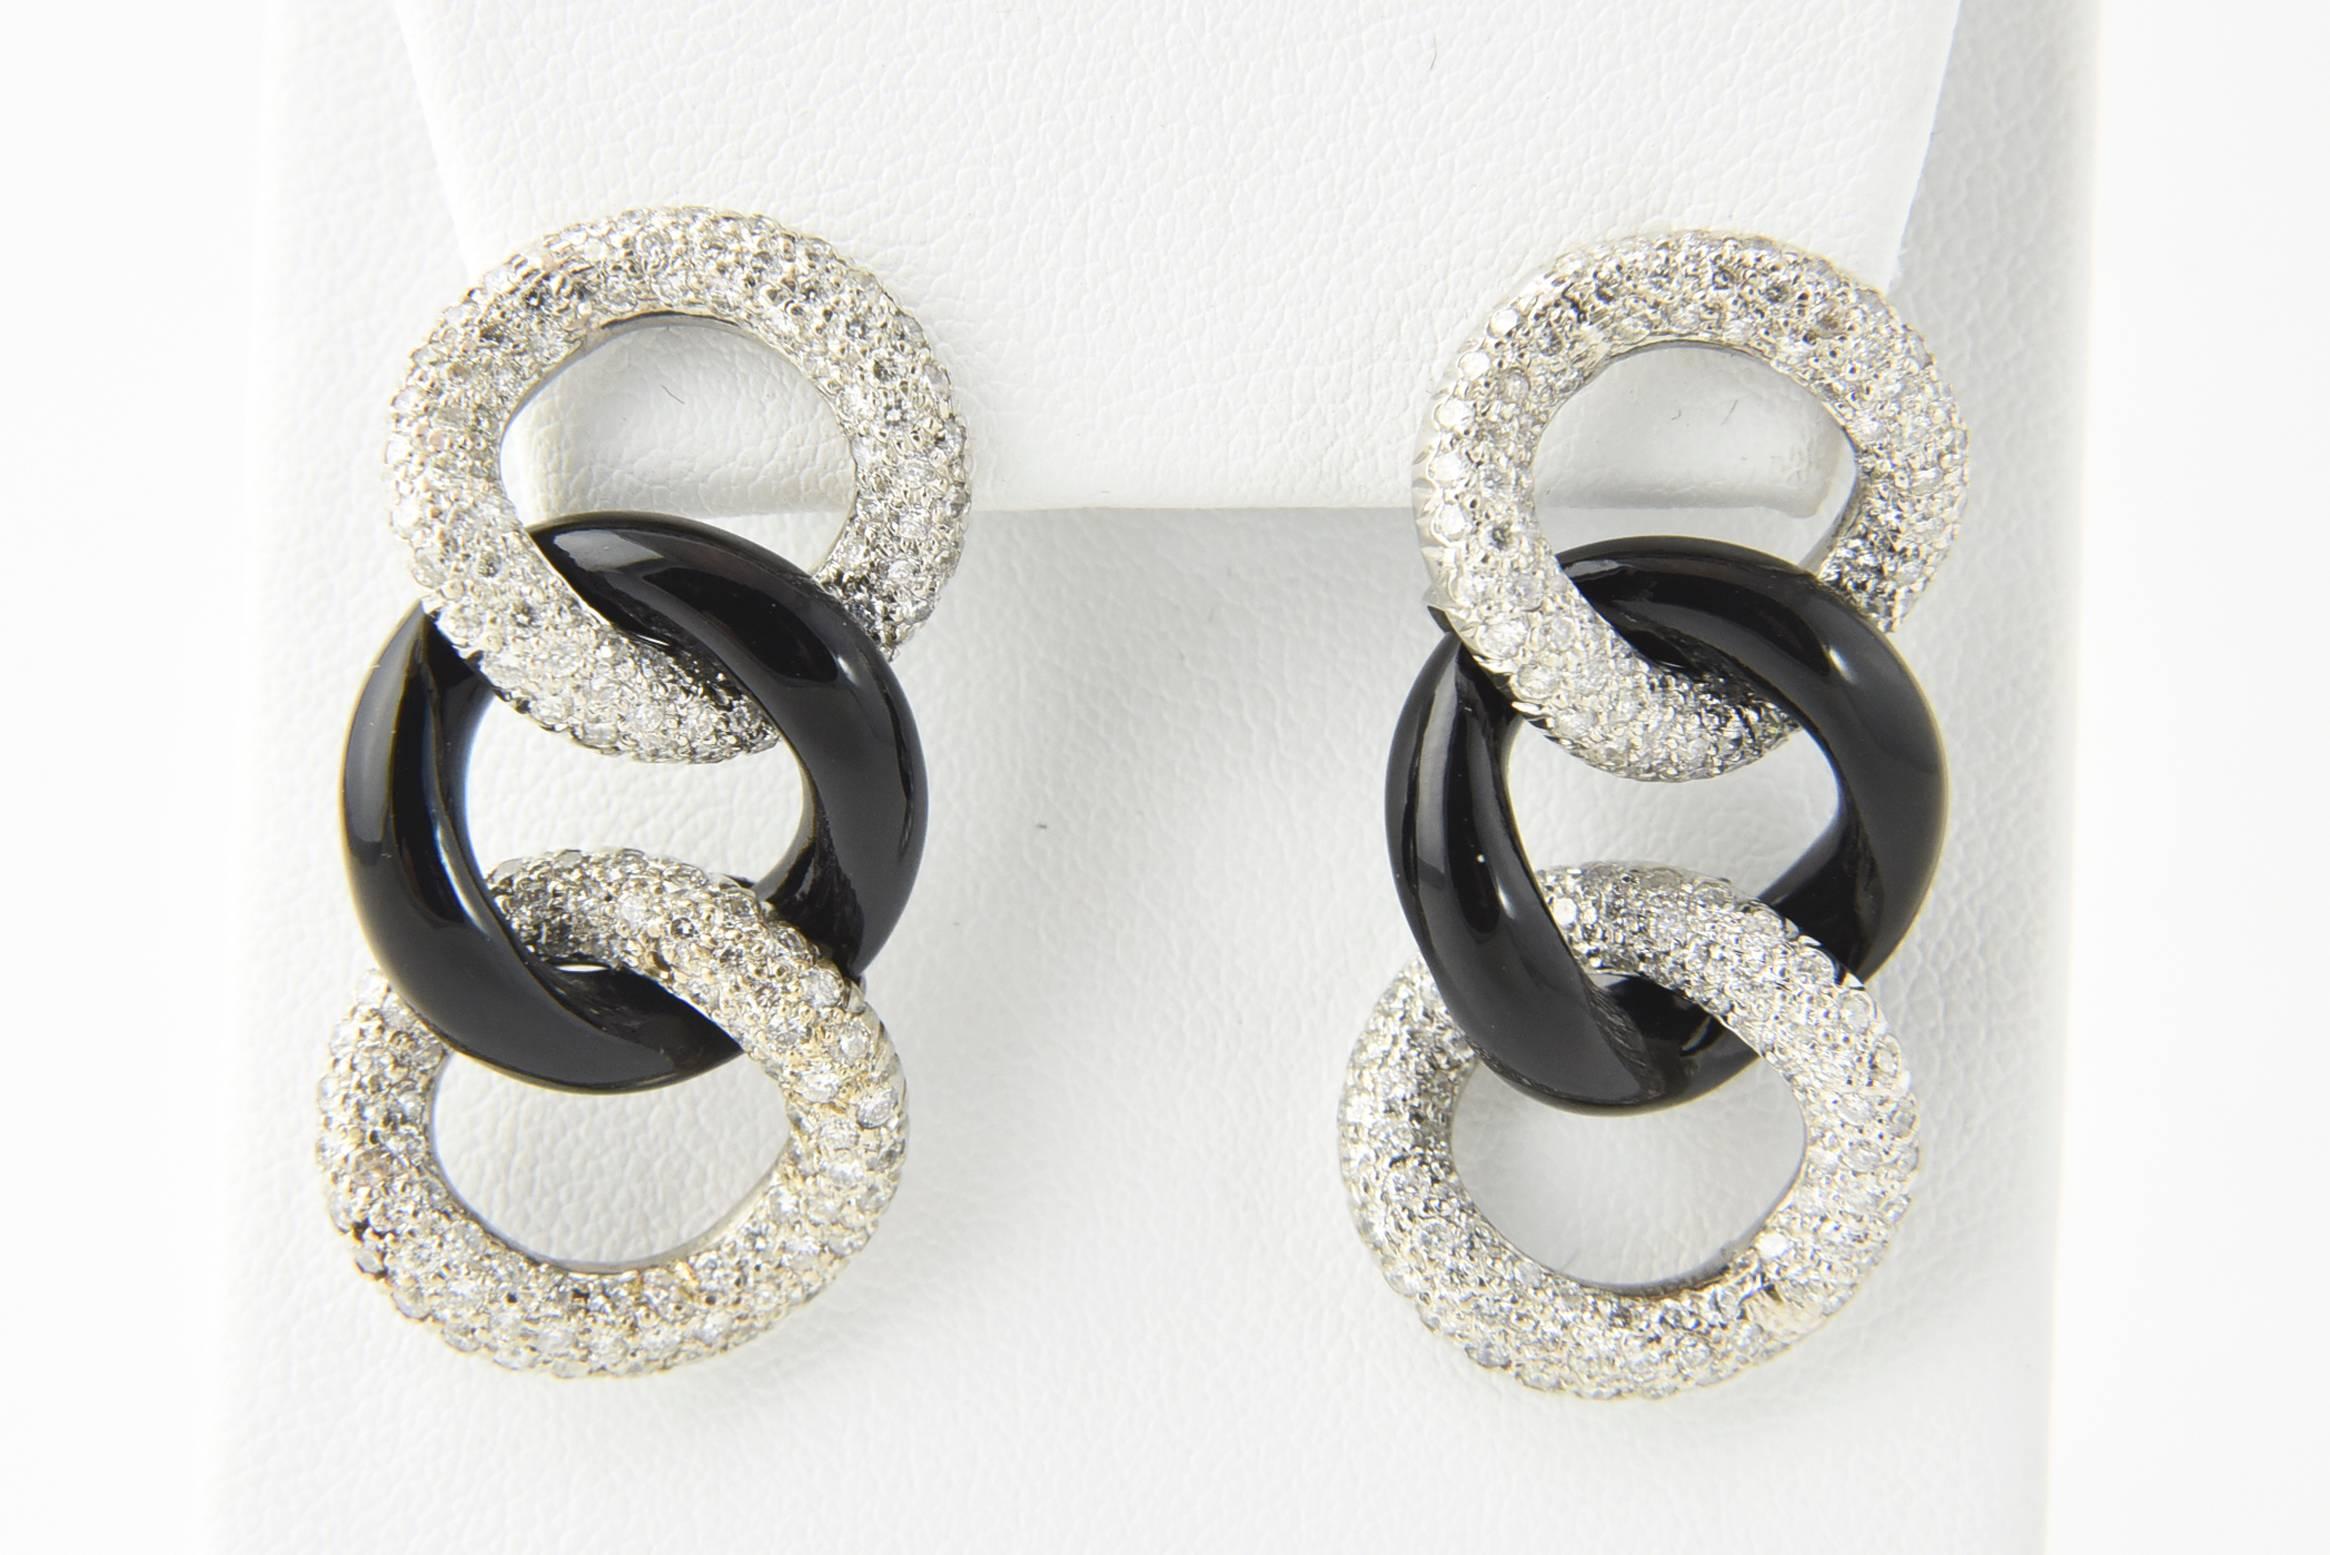 Elegant earrings featuring onyx and pave diamond links mounted in 18k white gold with 14k white gold backs.

They have posts.